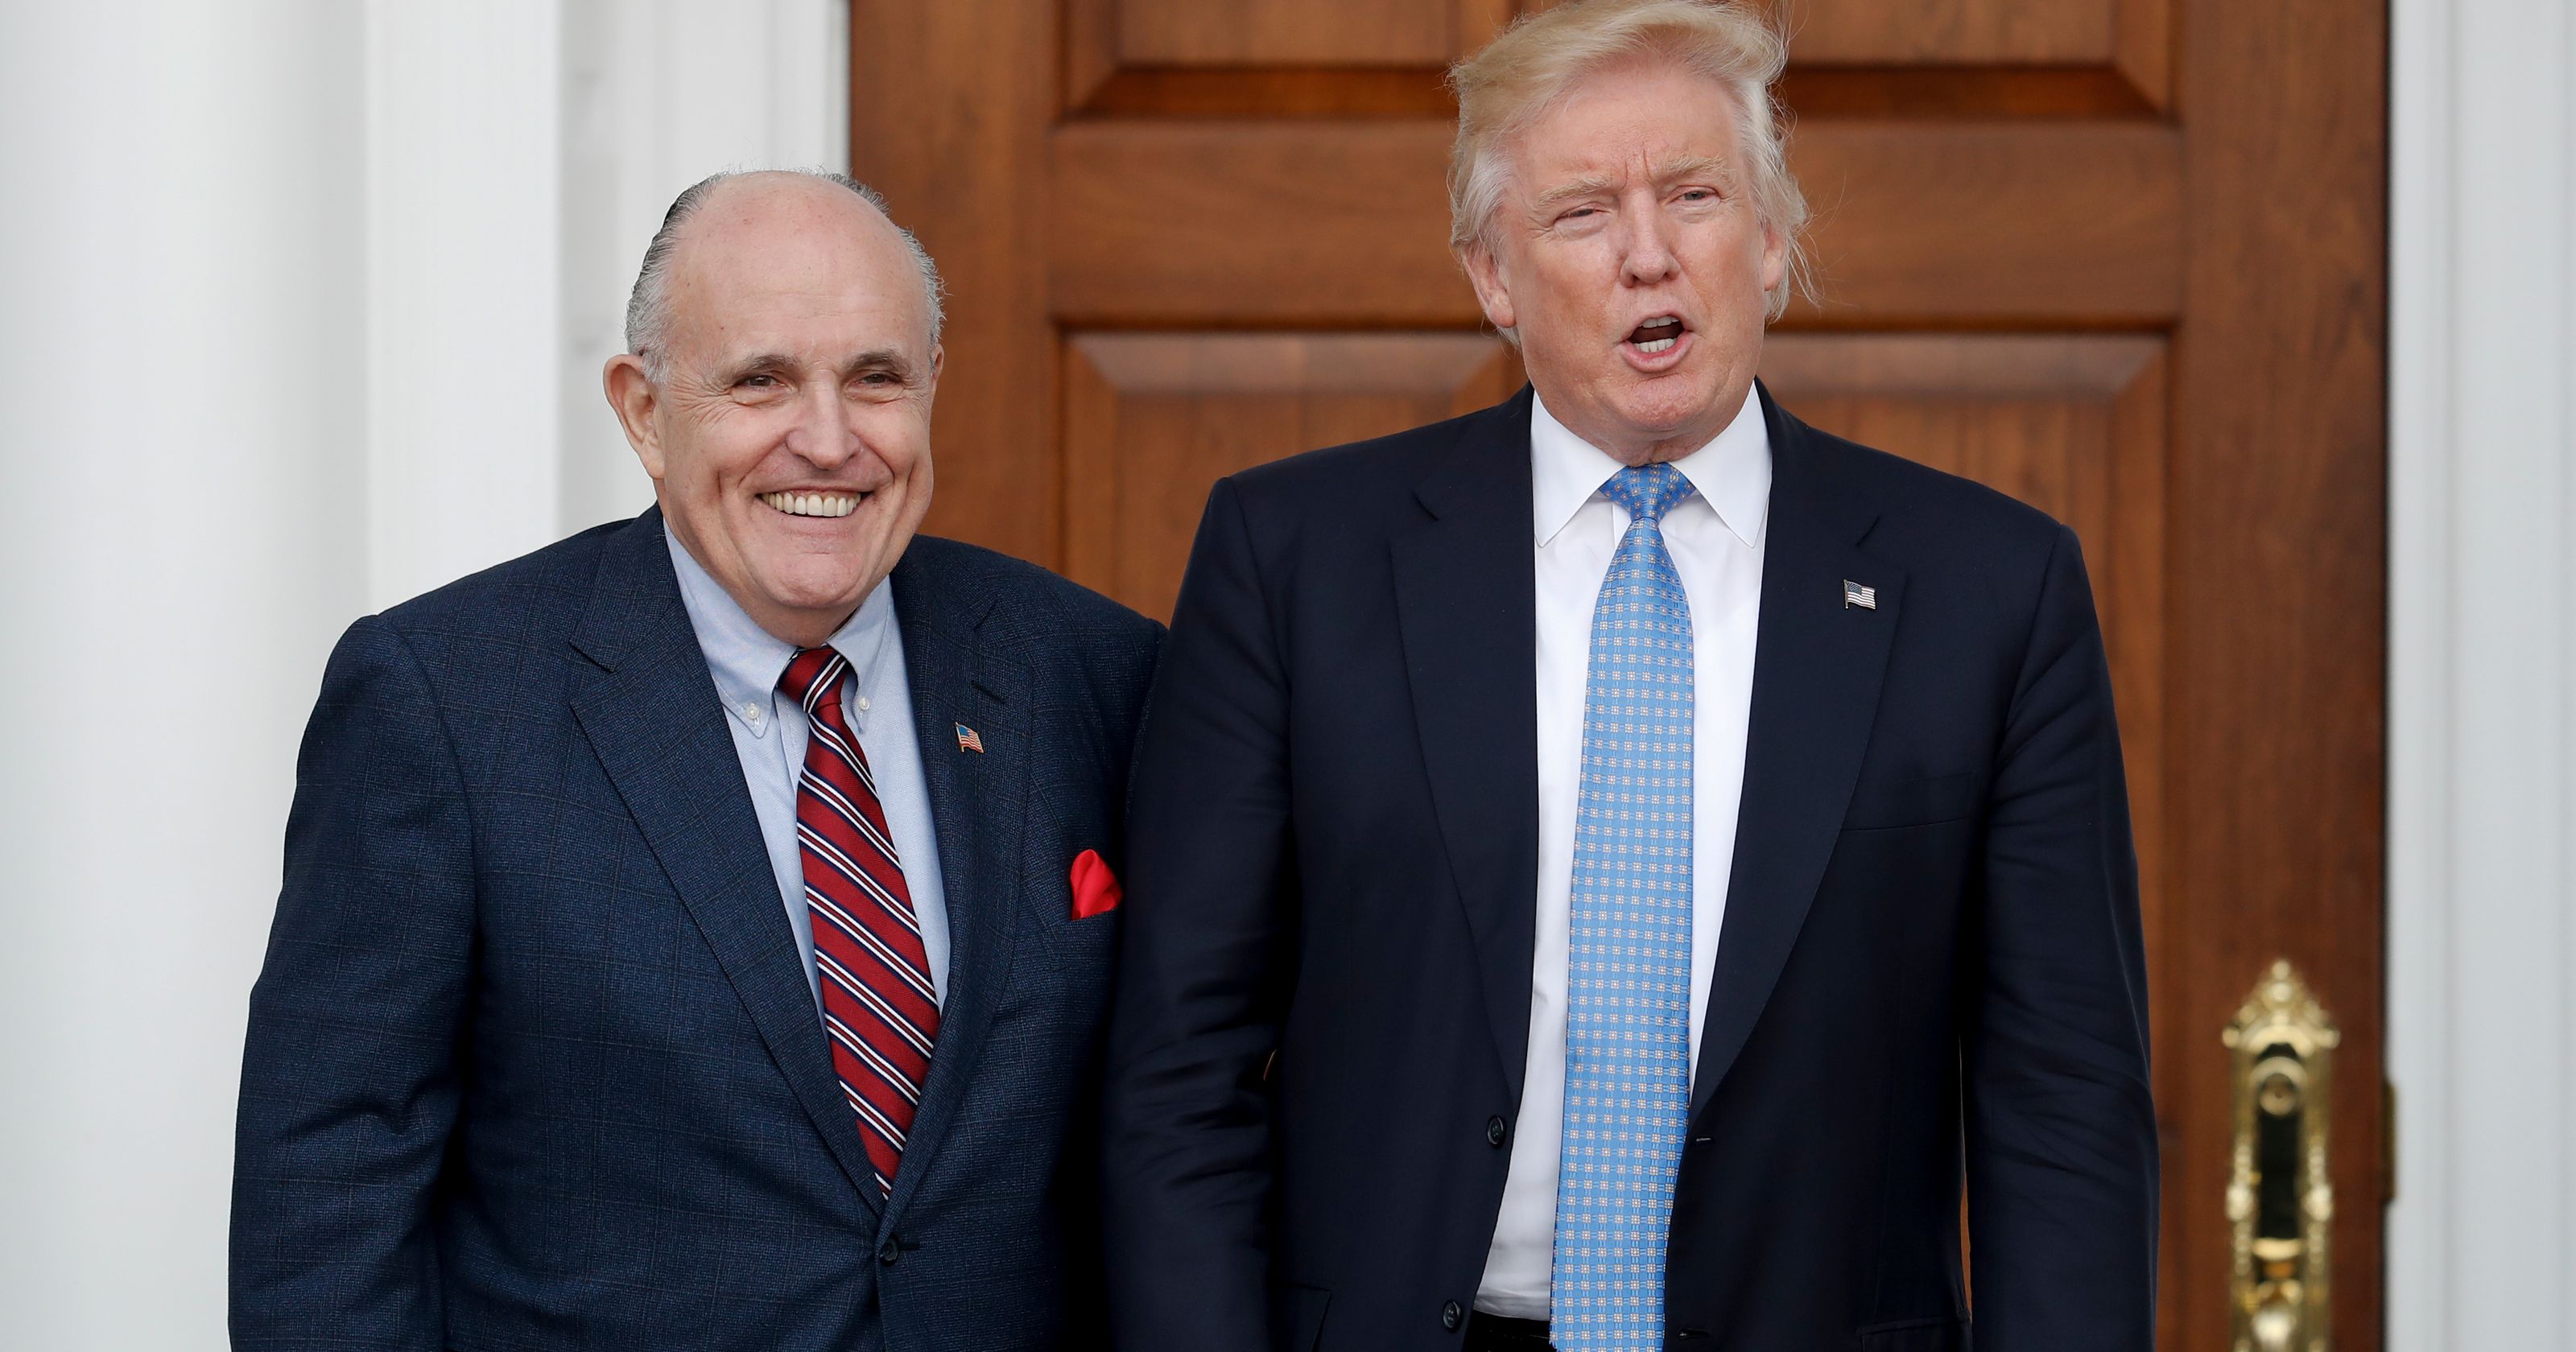 Donald Trump, Rudy Giuliani try to again explain Stormy Daniels payoff